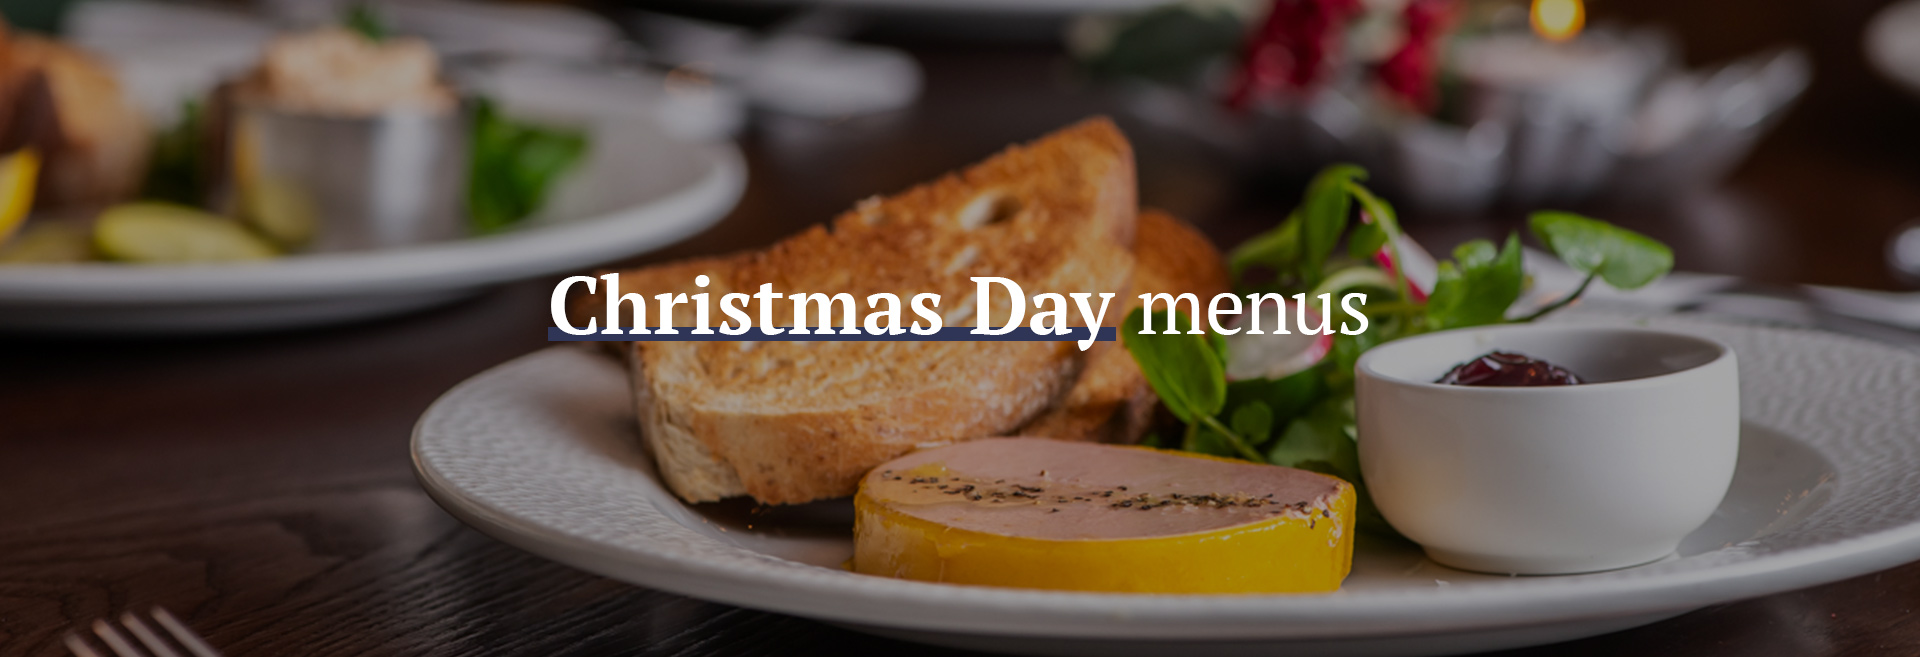 Christmas Day Menu at The Crown & Two Chairmen